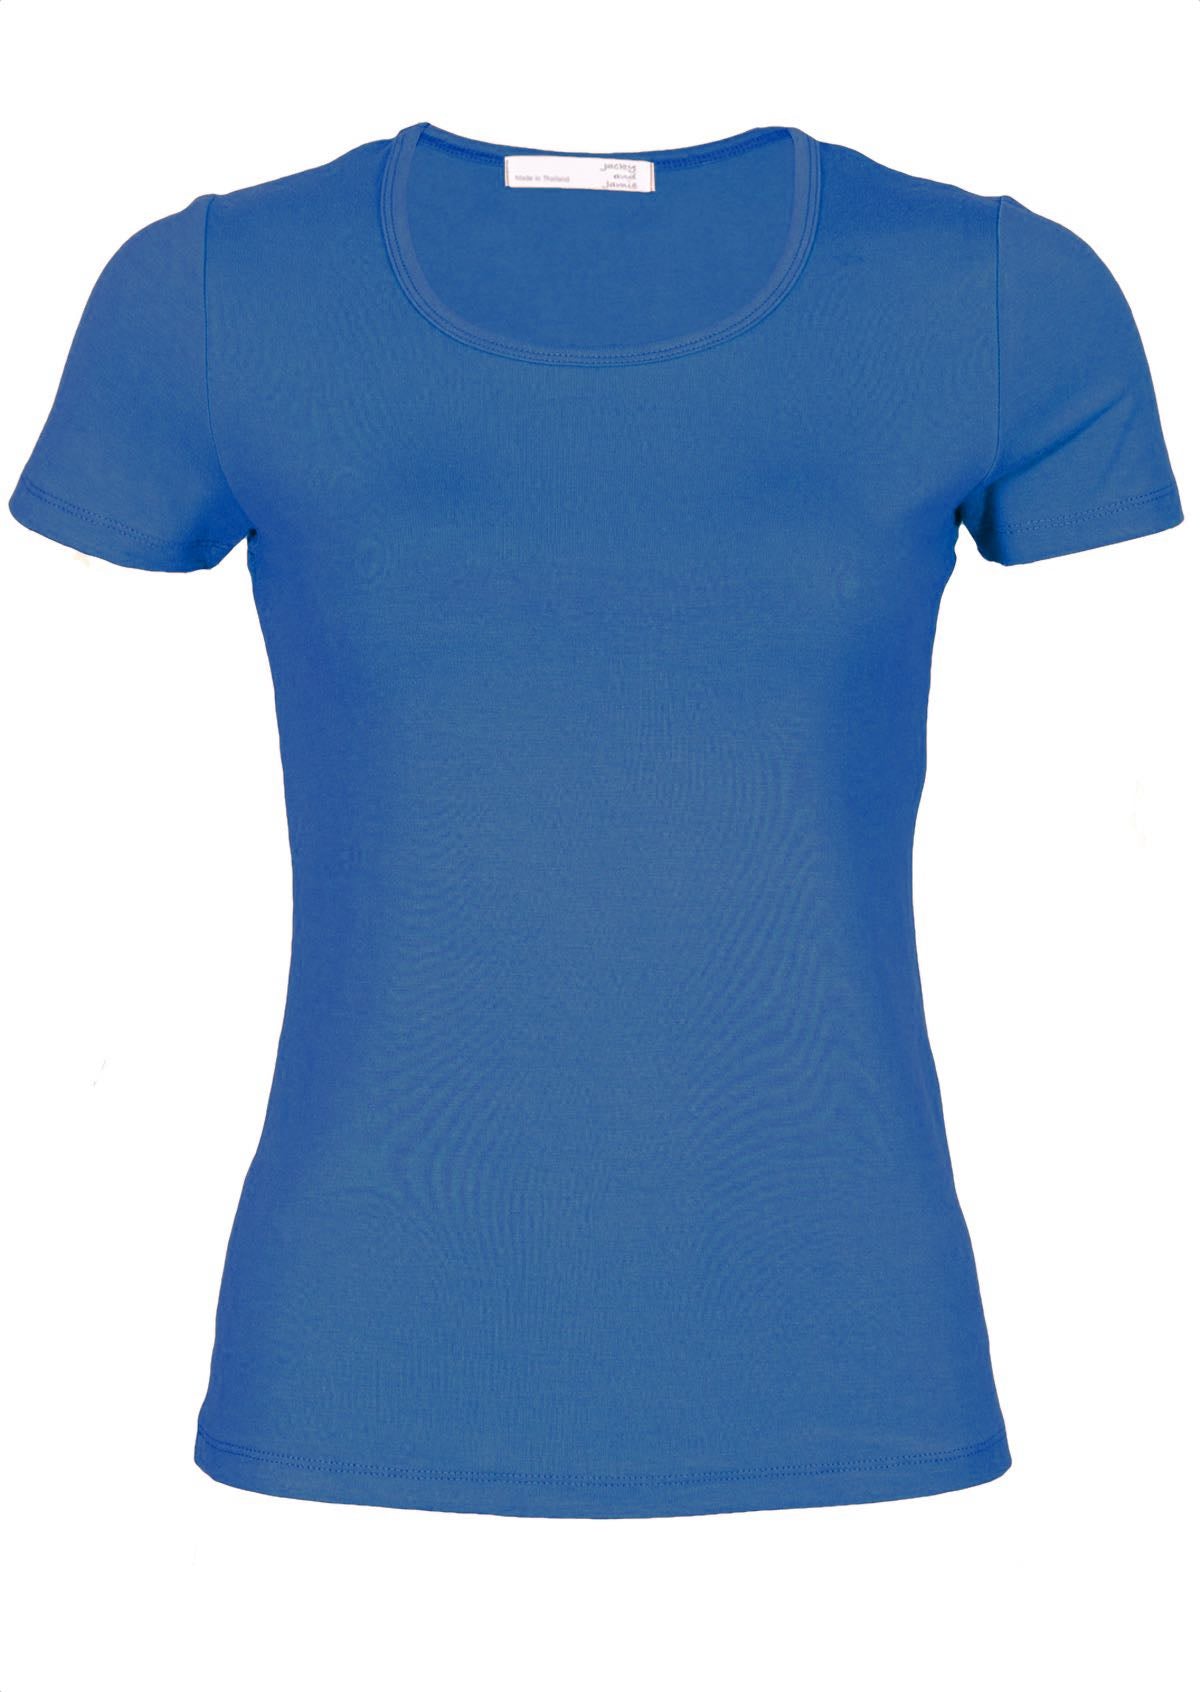 Women's scoop neck blue rayon fitted t-shirt.